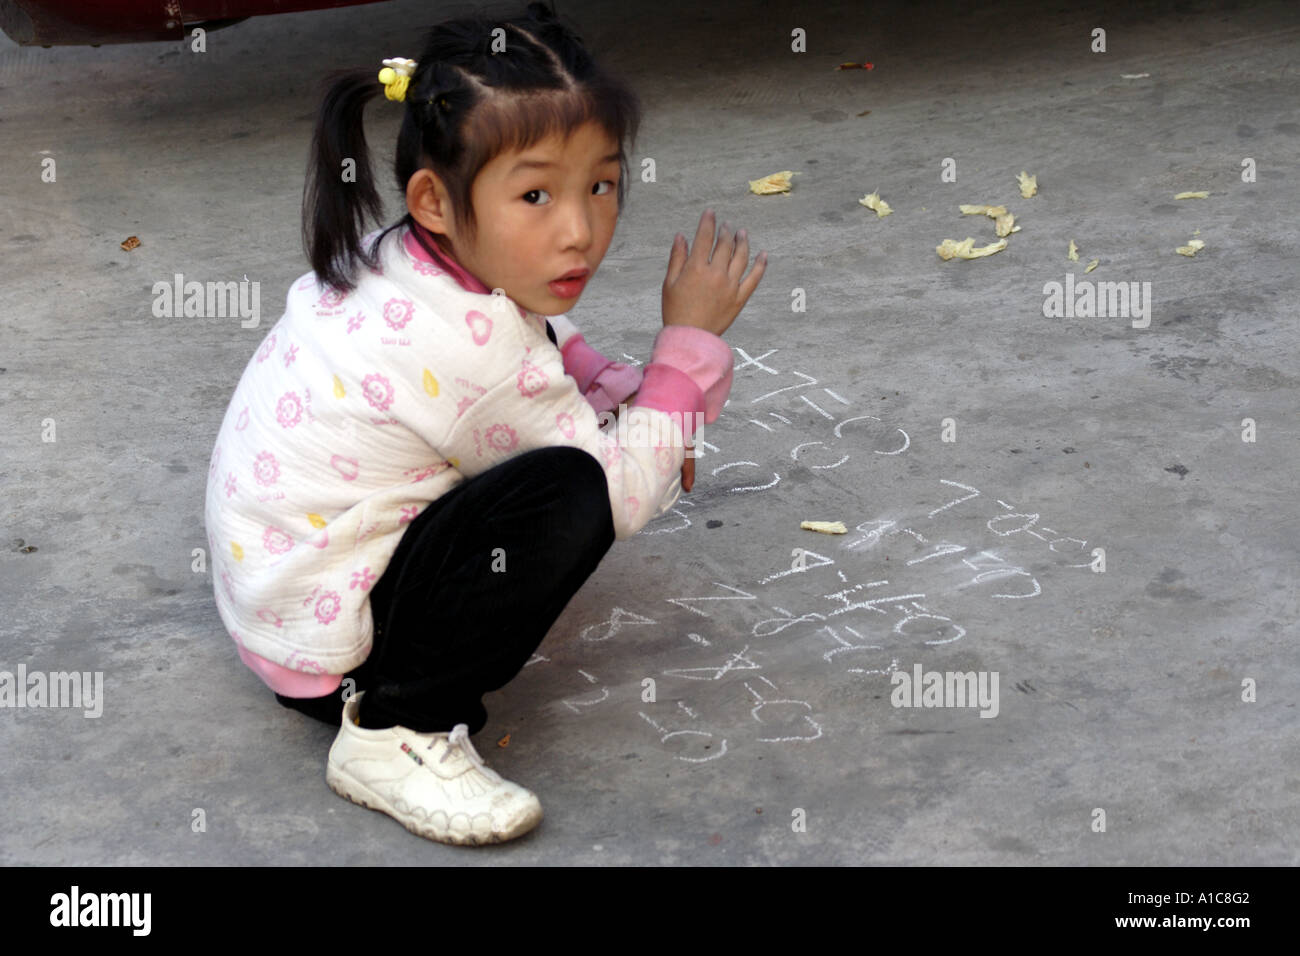 Little girl practices math with chalk on the concrete  Zhongshan, China Stock Photo